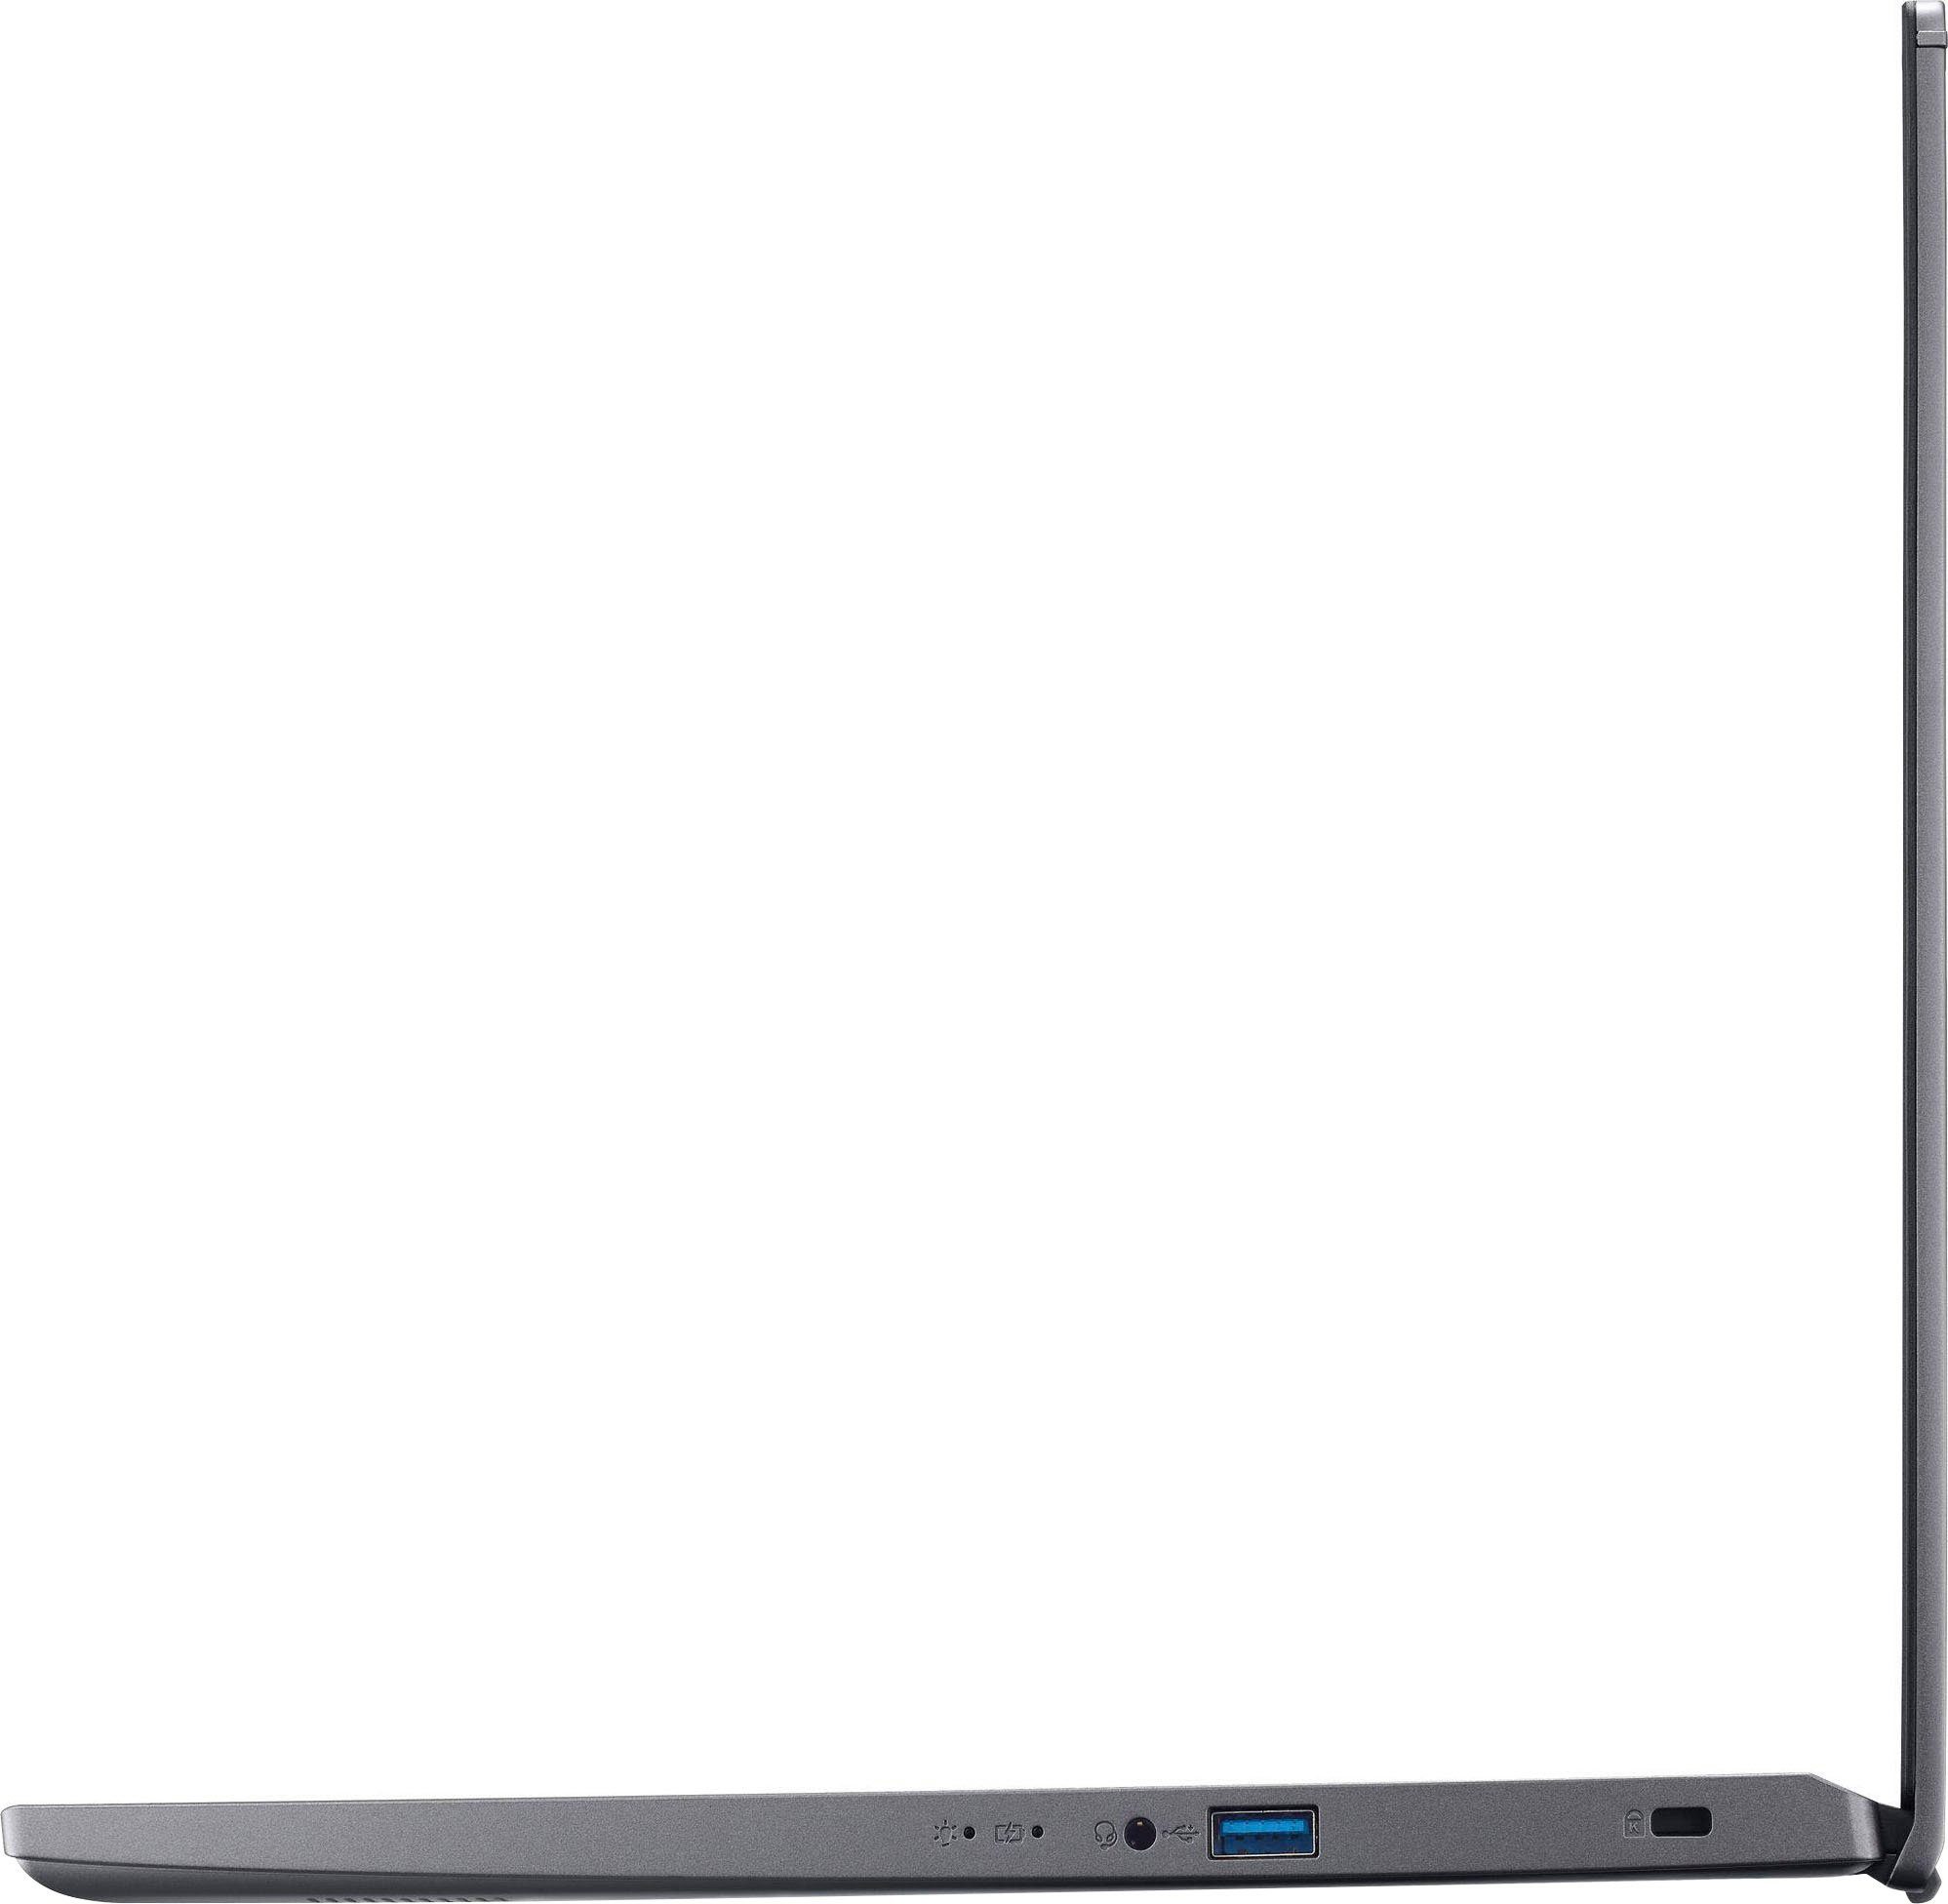 Intel A515-57-53QH cm/15,6 Acer 512 SSD) Zoll, UHD i5 Graphics, Core 12450H, (39,62 GB Notebook